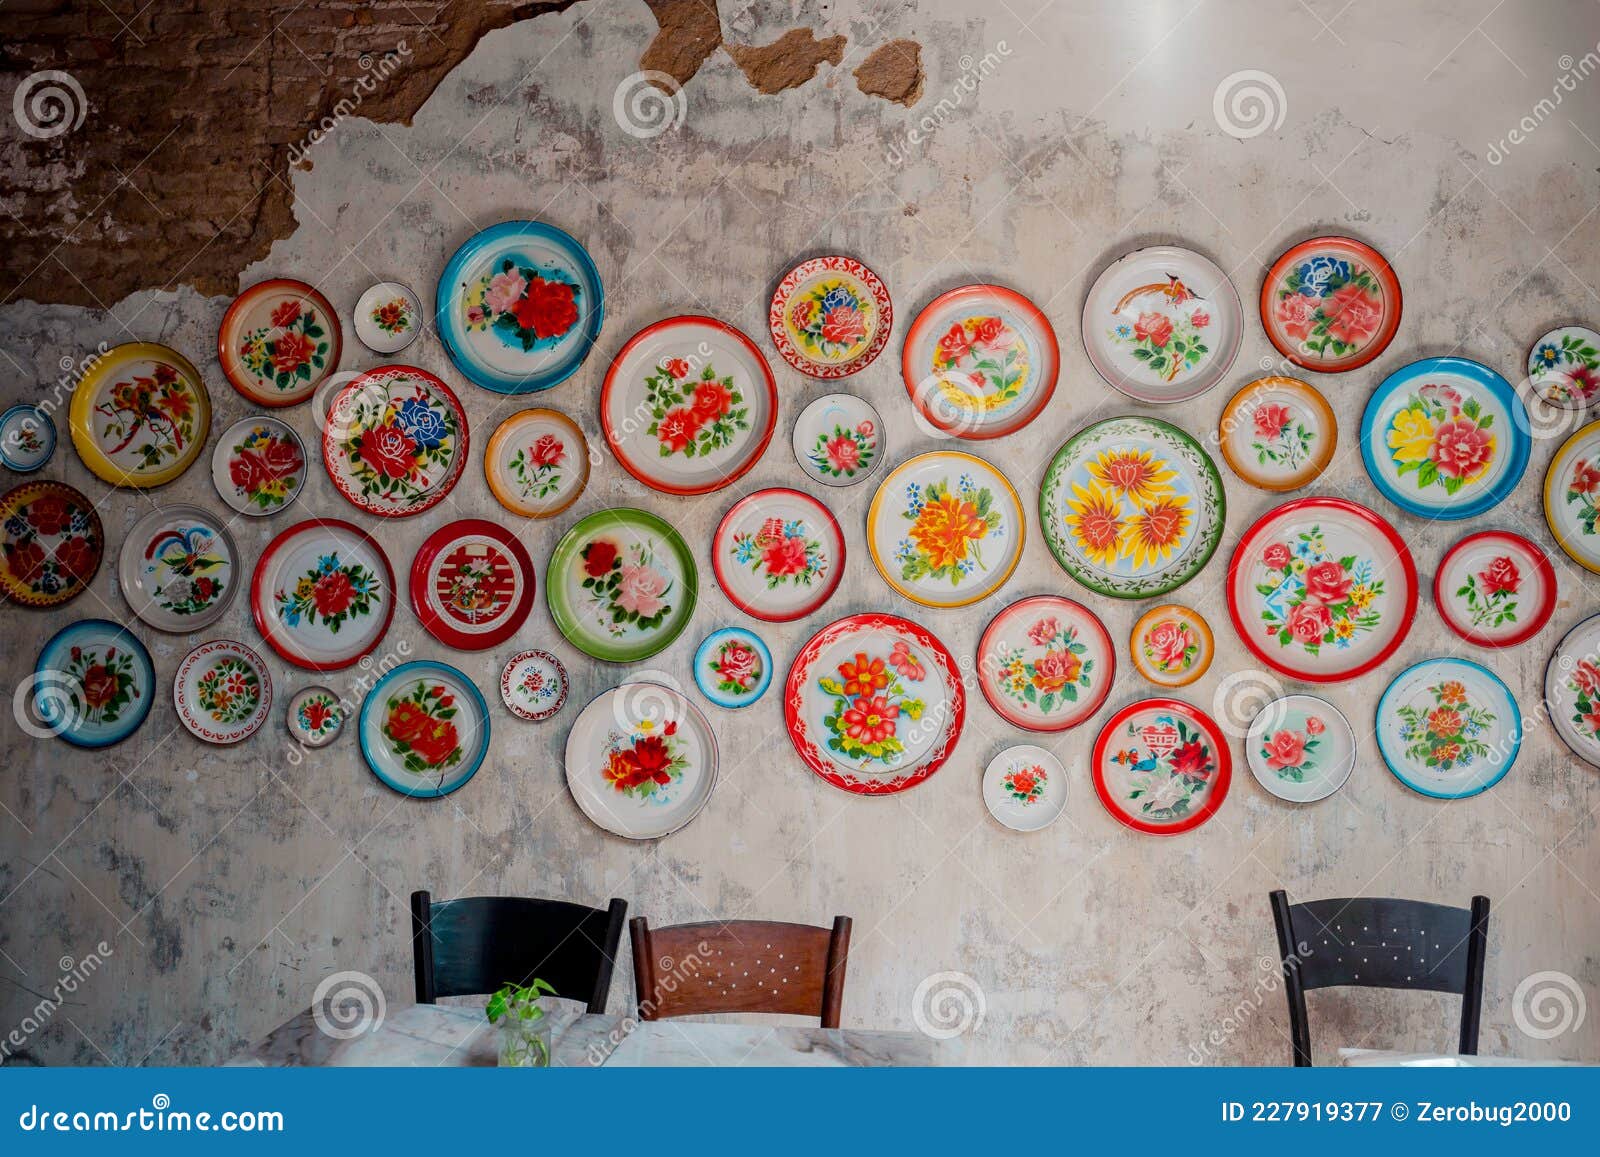 https://thumbs.dreamstime.com/z/malacca-malaysia-july-interior-look-wooden-furniture-vintage-decorations-local-hipster-cafe-called-fix-227919377.jpg